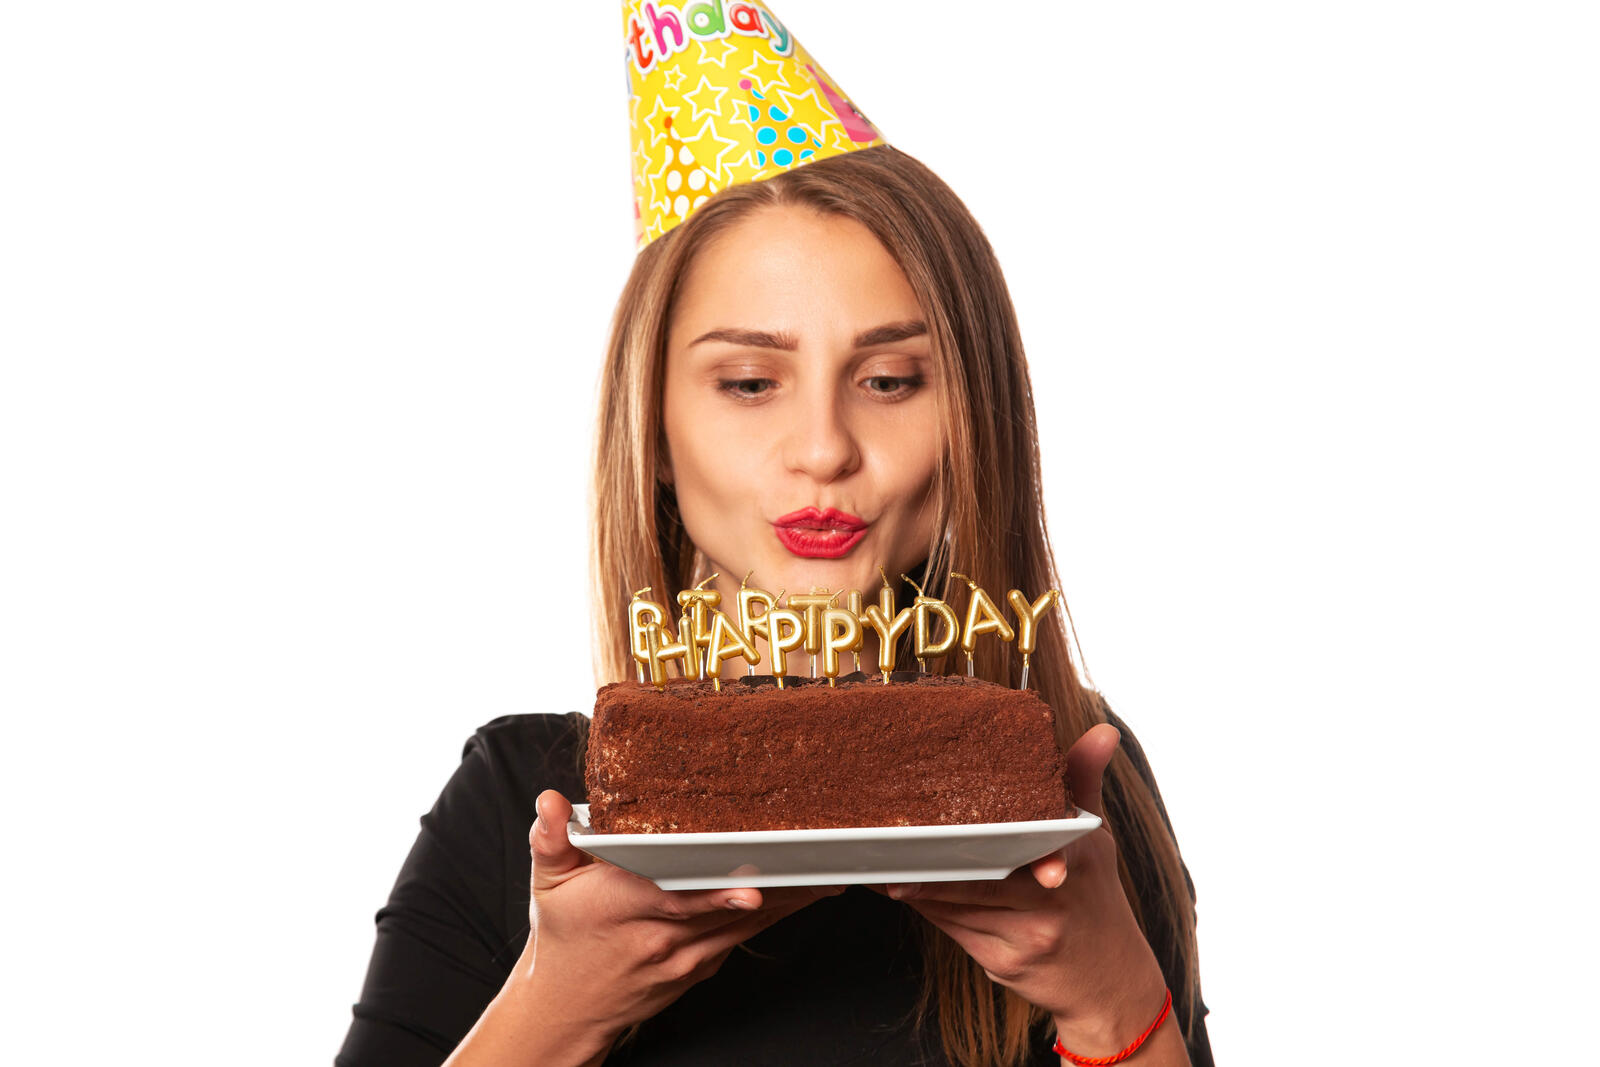 Wallpapers woman birthday brown haired on the desktop